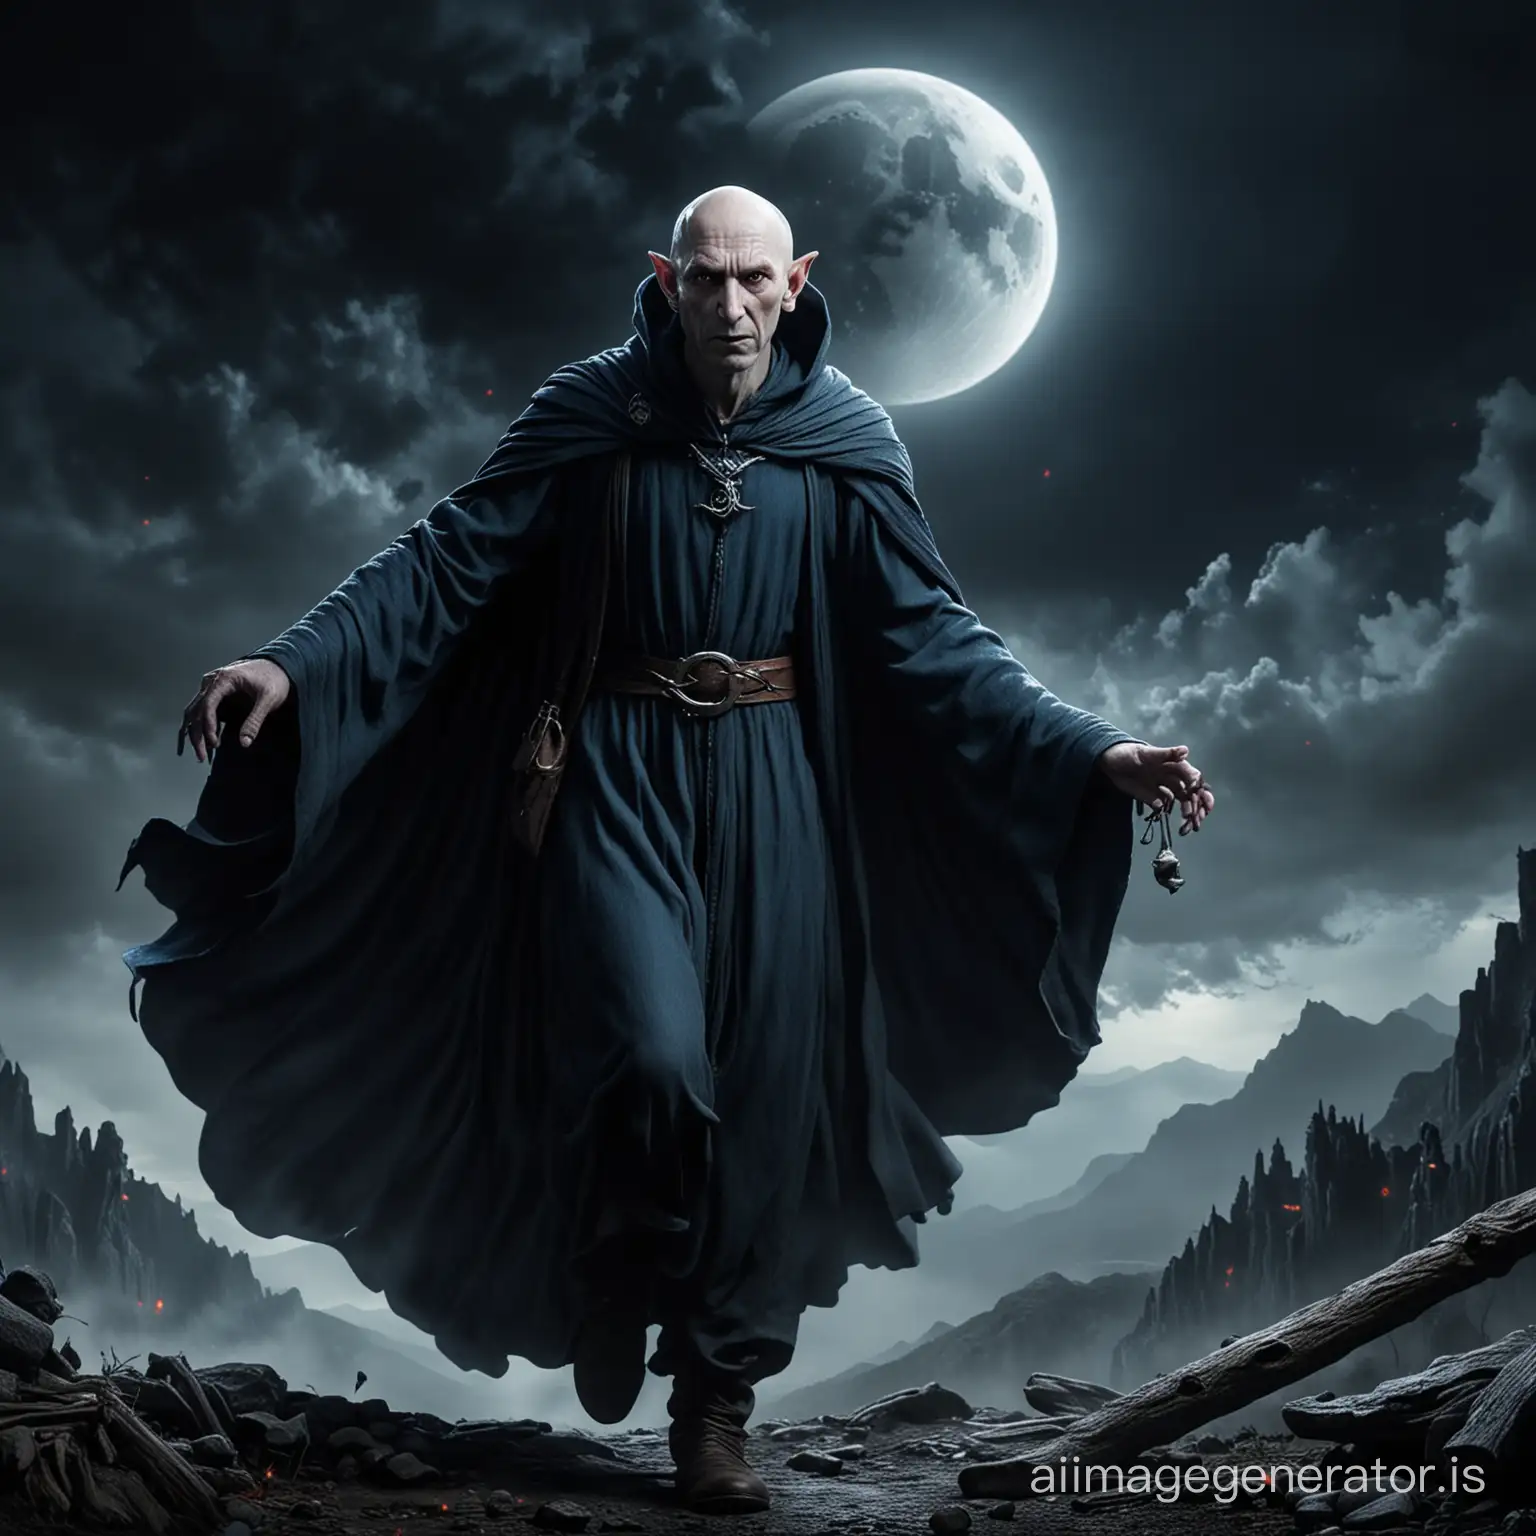 Realistic photo of a bad wizard. He is very thin and tall. He is bald. He hal elvish ears. He has a long hooked nose and red eyes. He wears dark blue robes. He's flying in the moonlight. Fantasy movie. Lord of the rings. Realistic